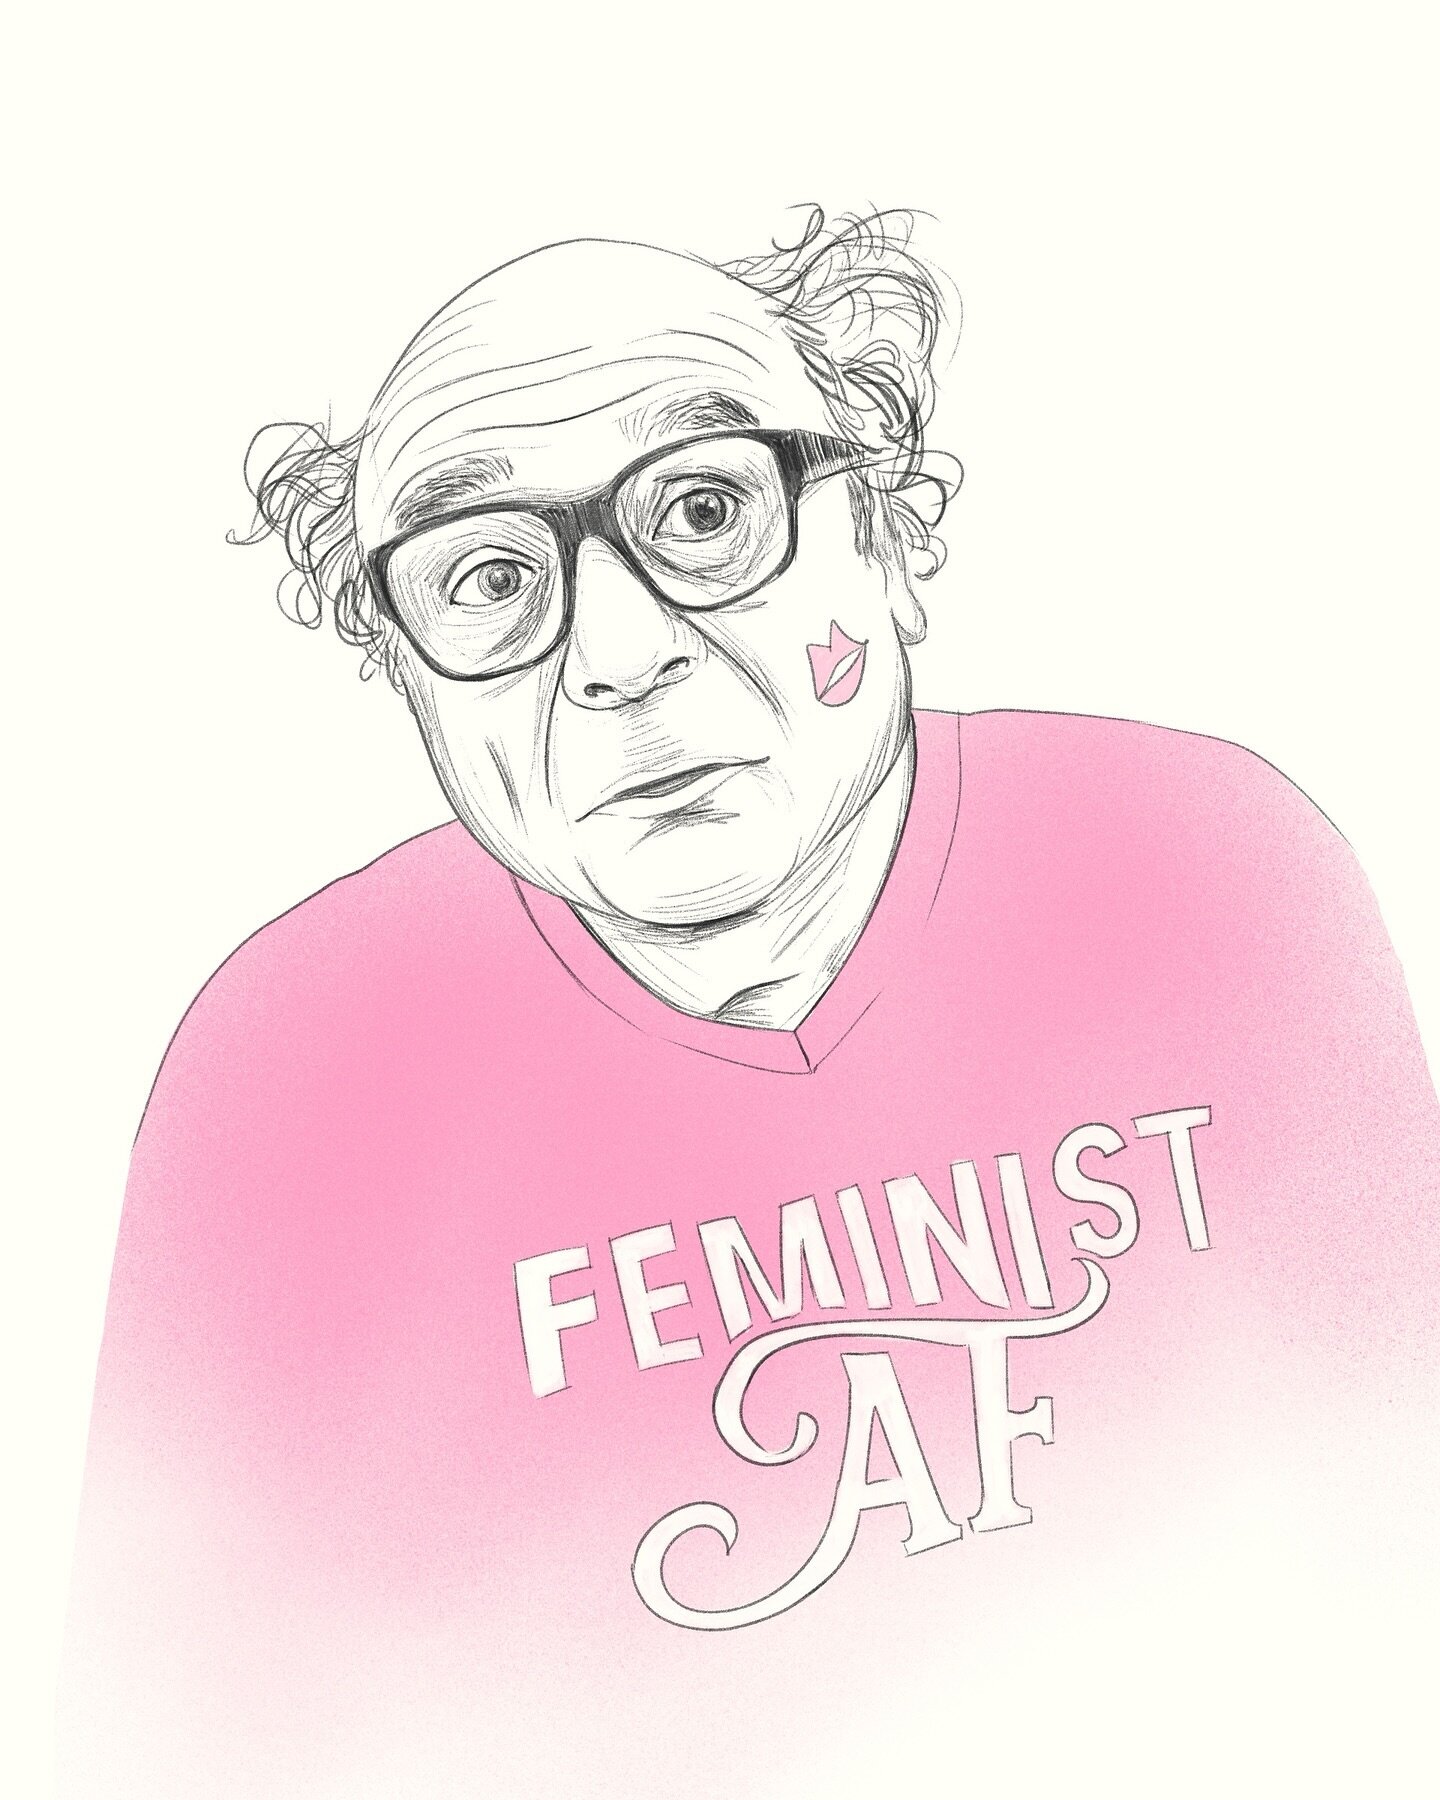 I&rsquo;ve been working on my DeVitos! 💋 Drawn in @procreate #feminism #alwayssunny #dailydevito